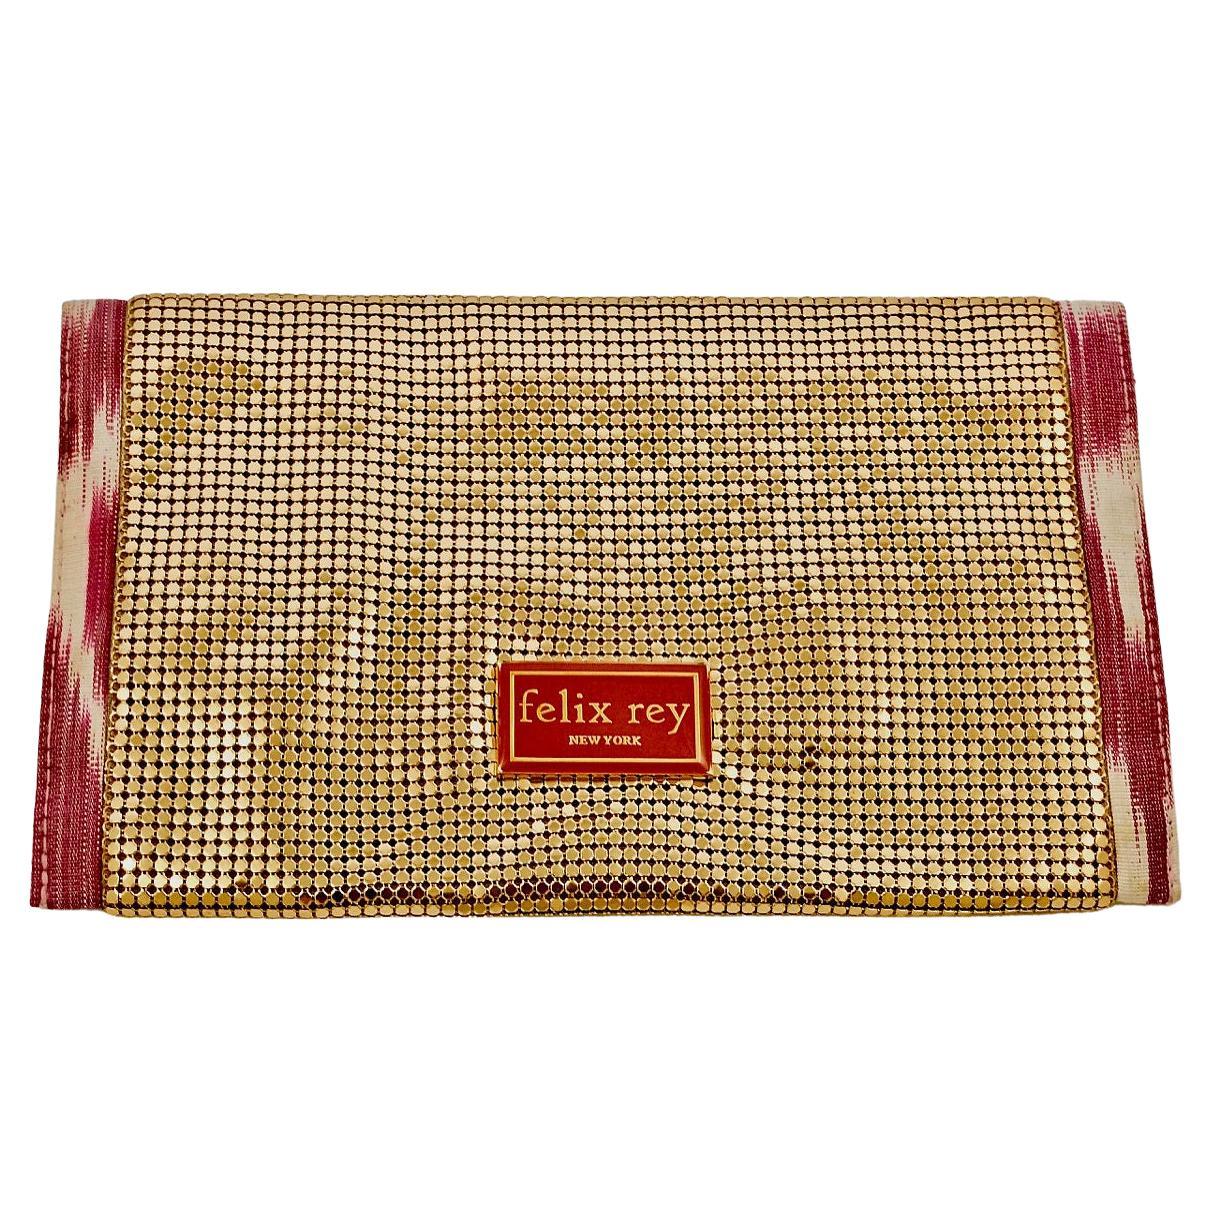 Wonderful Felix Rey New York gold mesh clutch bag with pink and white ikat weave edging, and a double magnetic closure. Measuring width 22.8 cm / 8.9 inches and height 14 cm / 5.5 inches. Inside there is a lovely leopard print lining with a pocket.